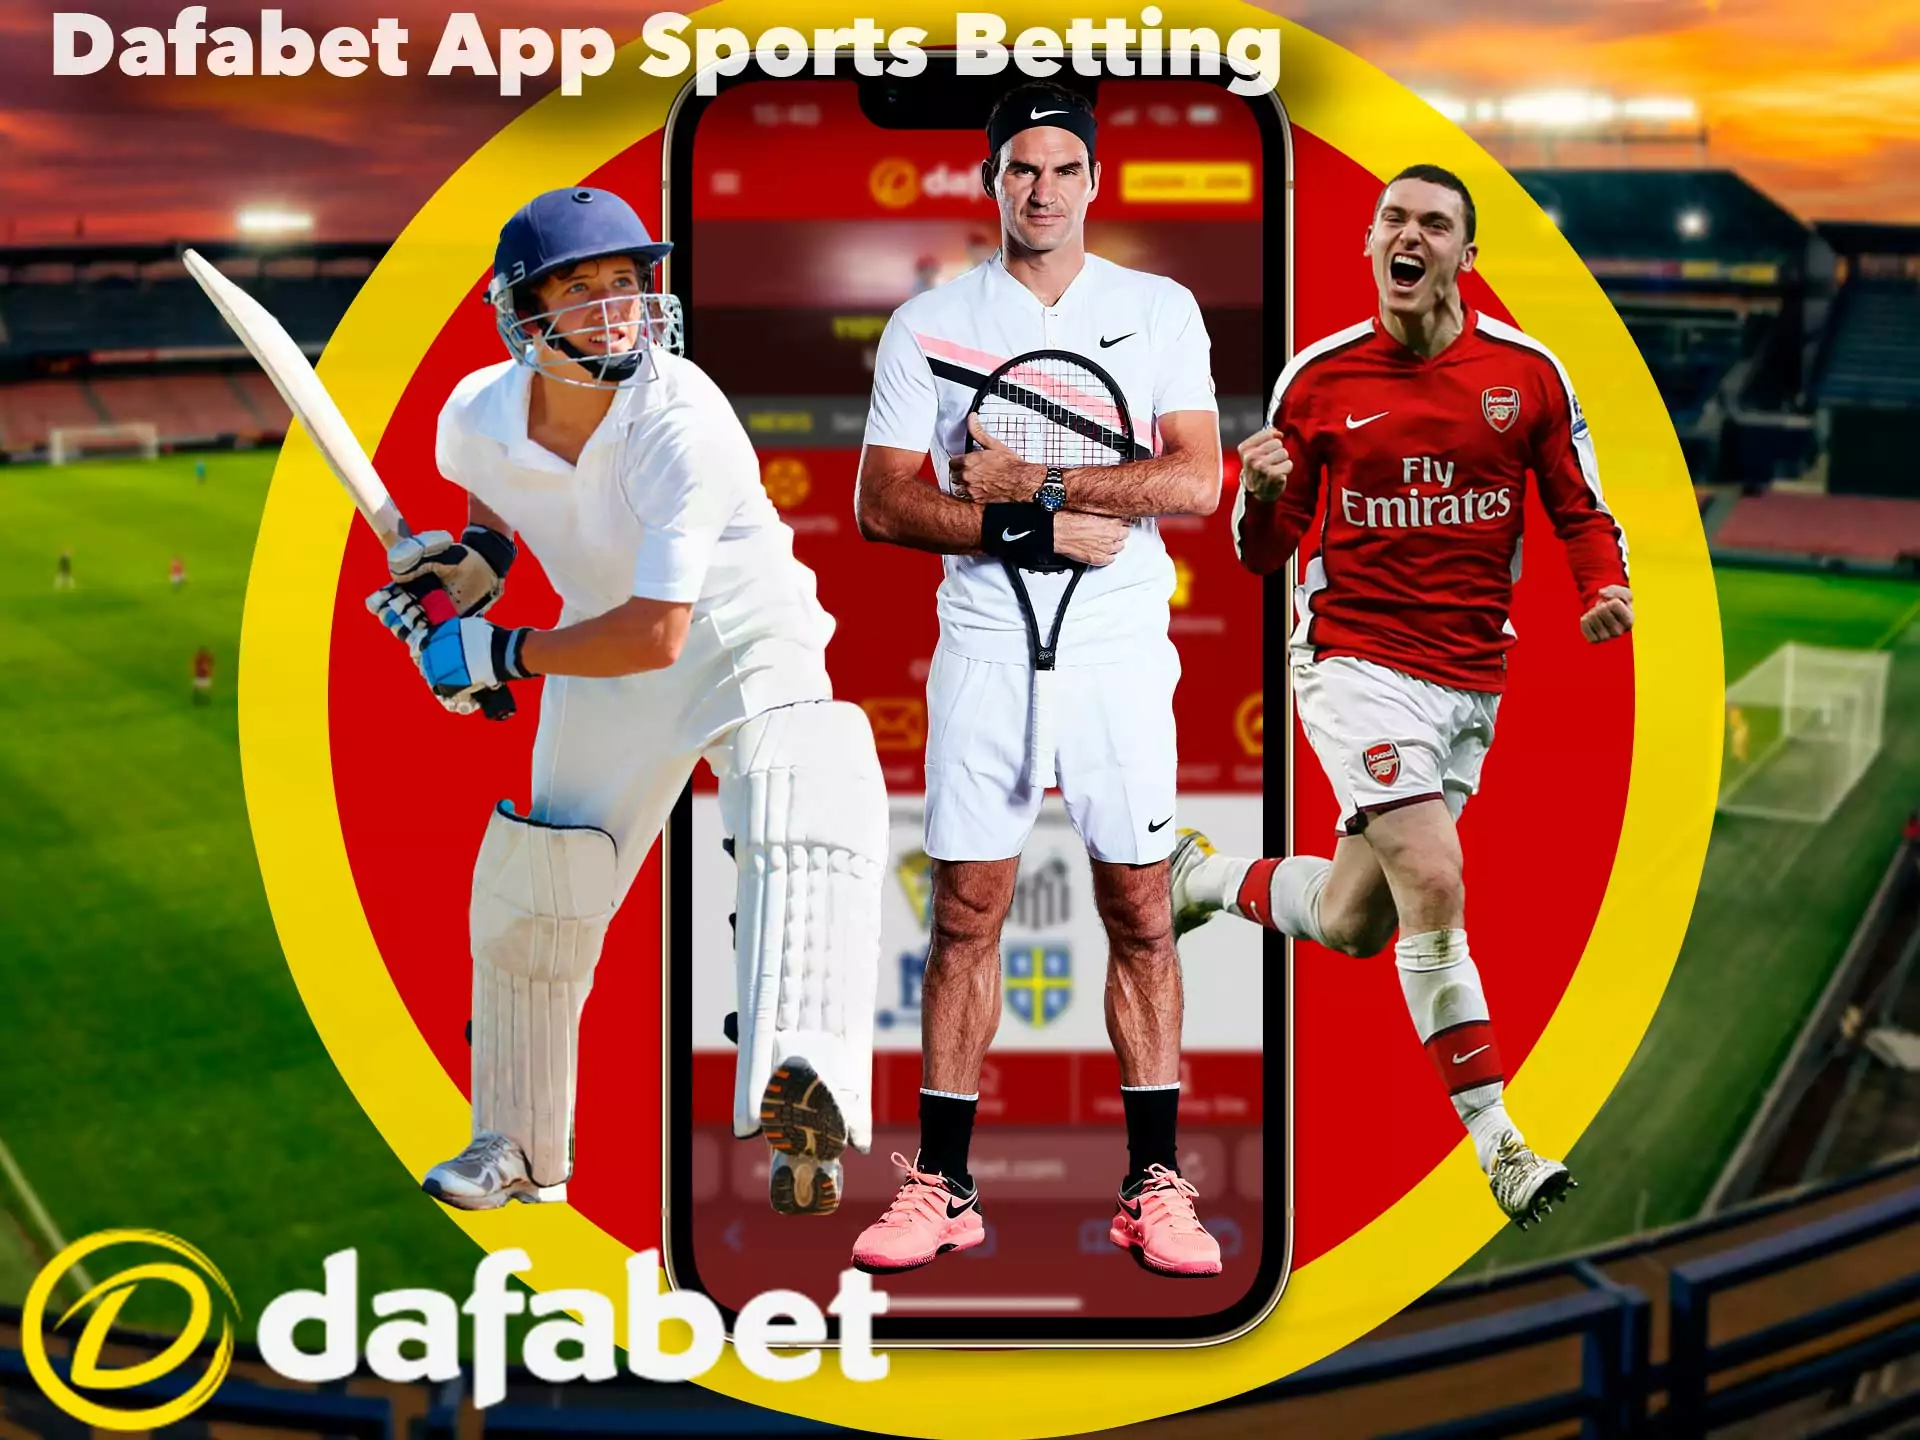 Rich selection of sports content in Dafabet app.